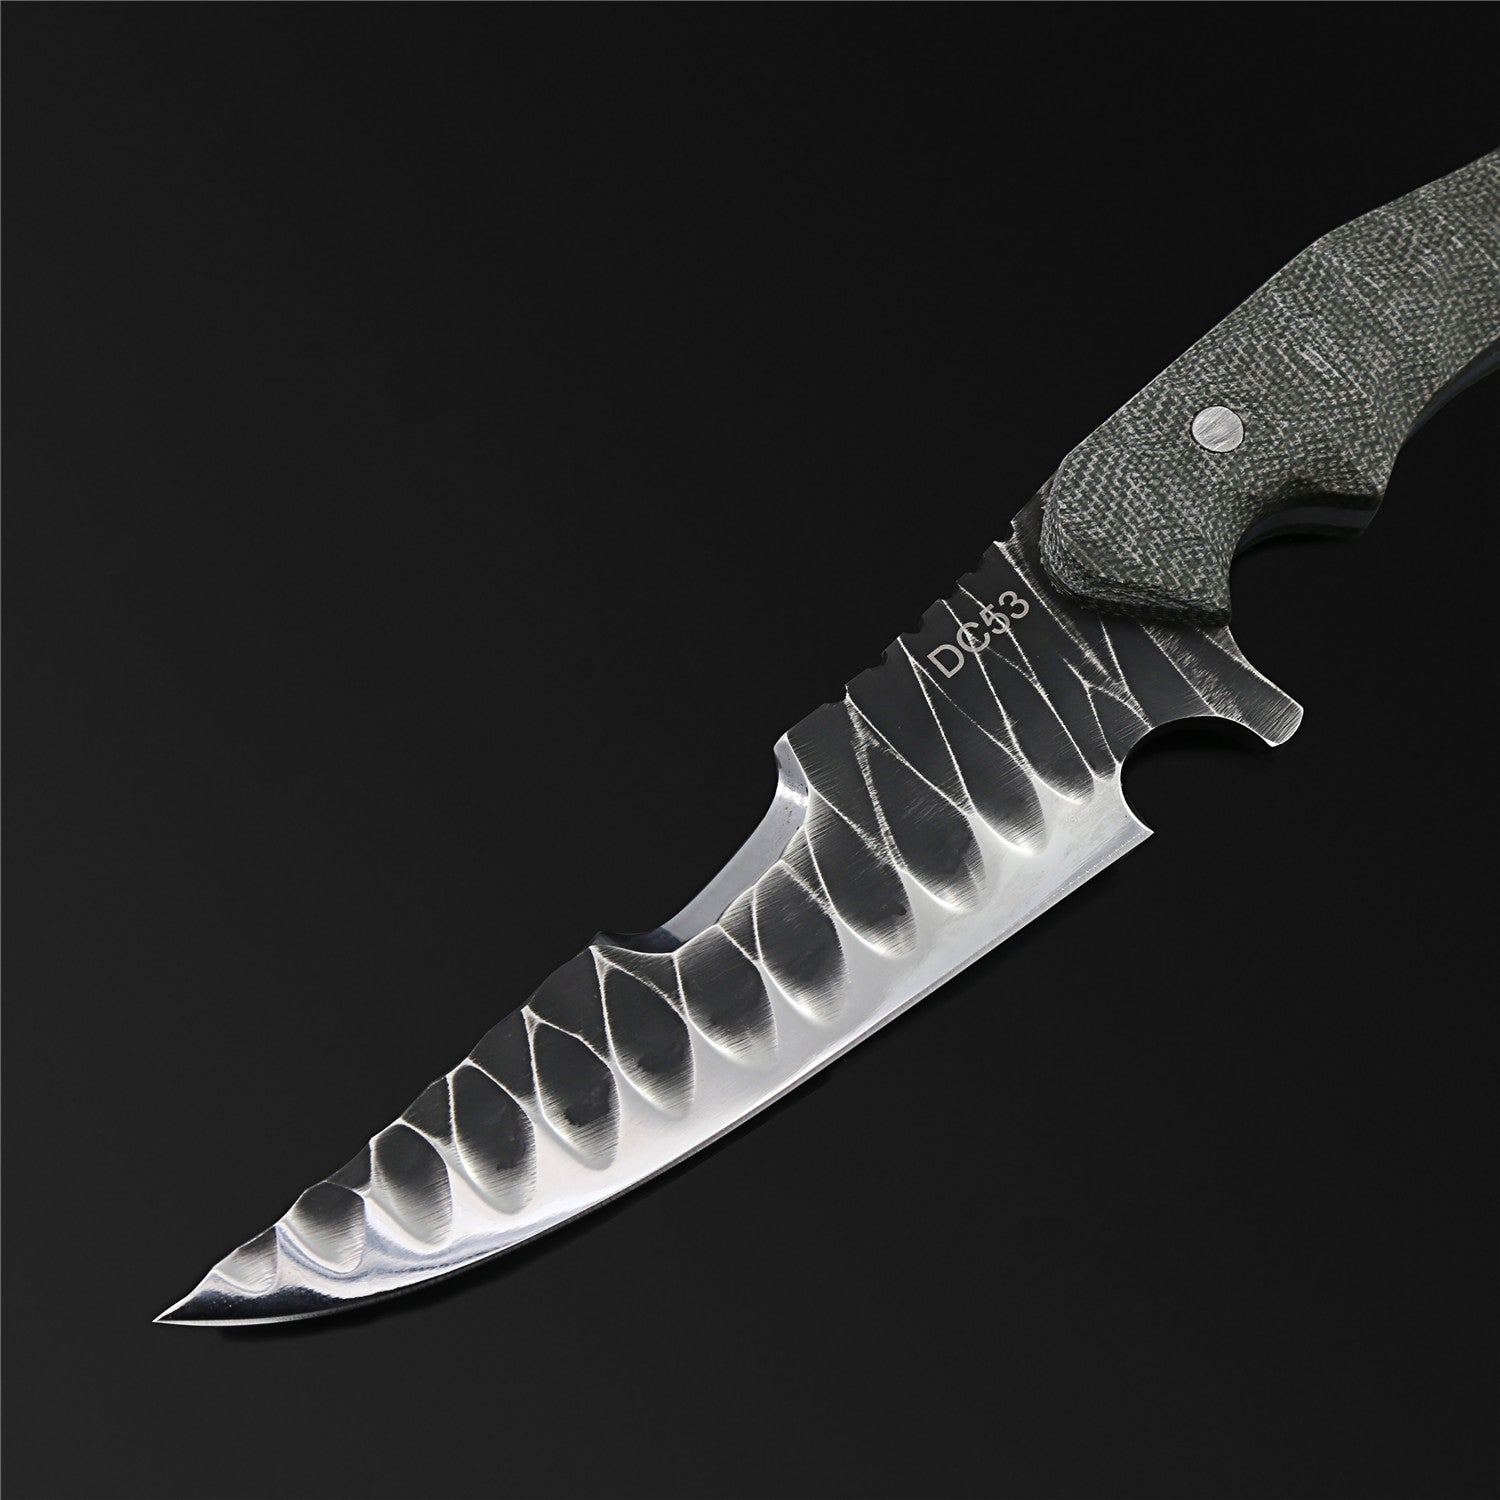 The Butcher DC53 Steel Fixed Blade